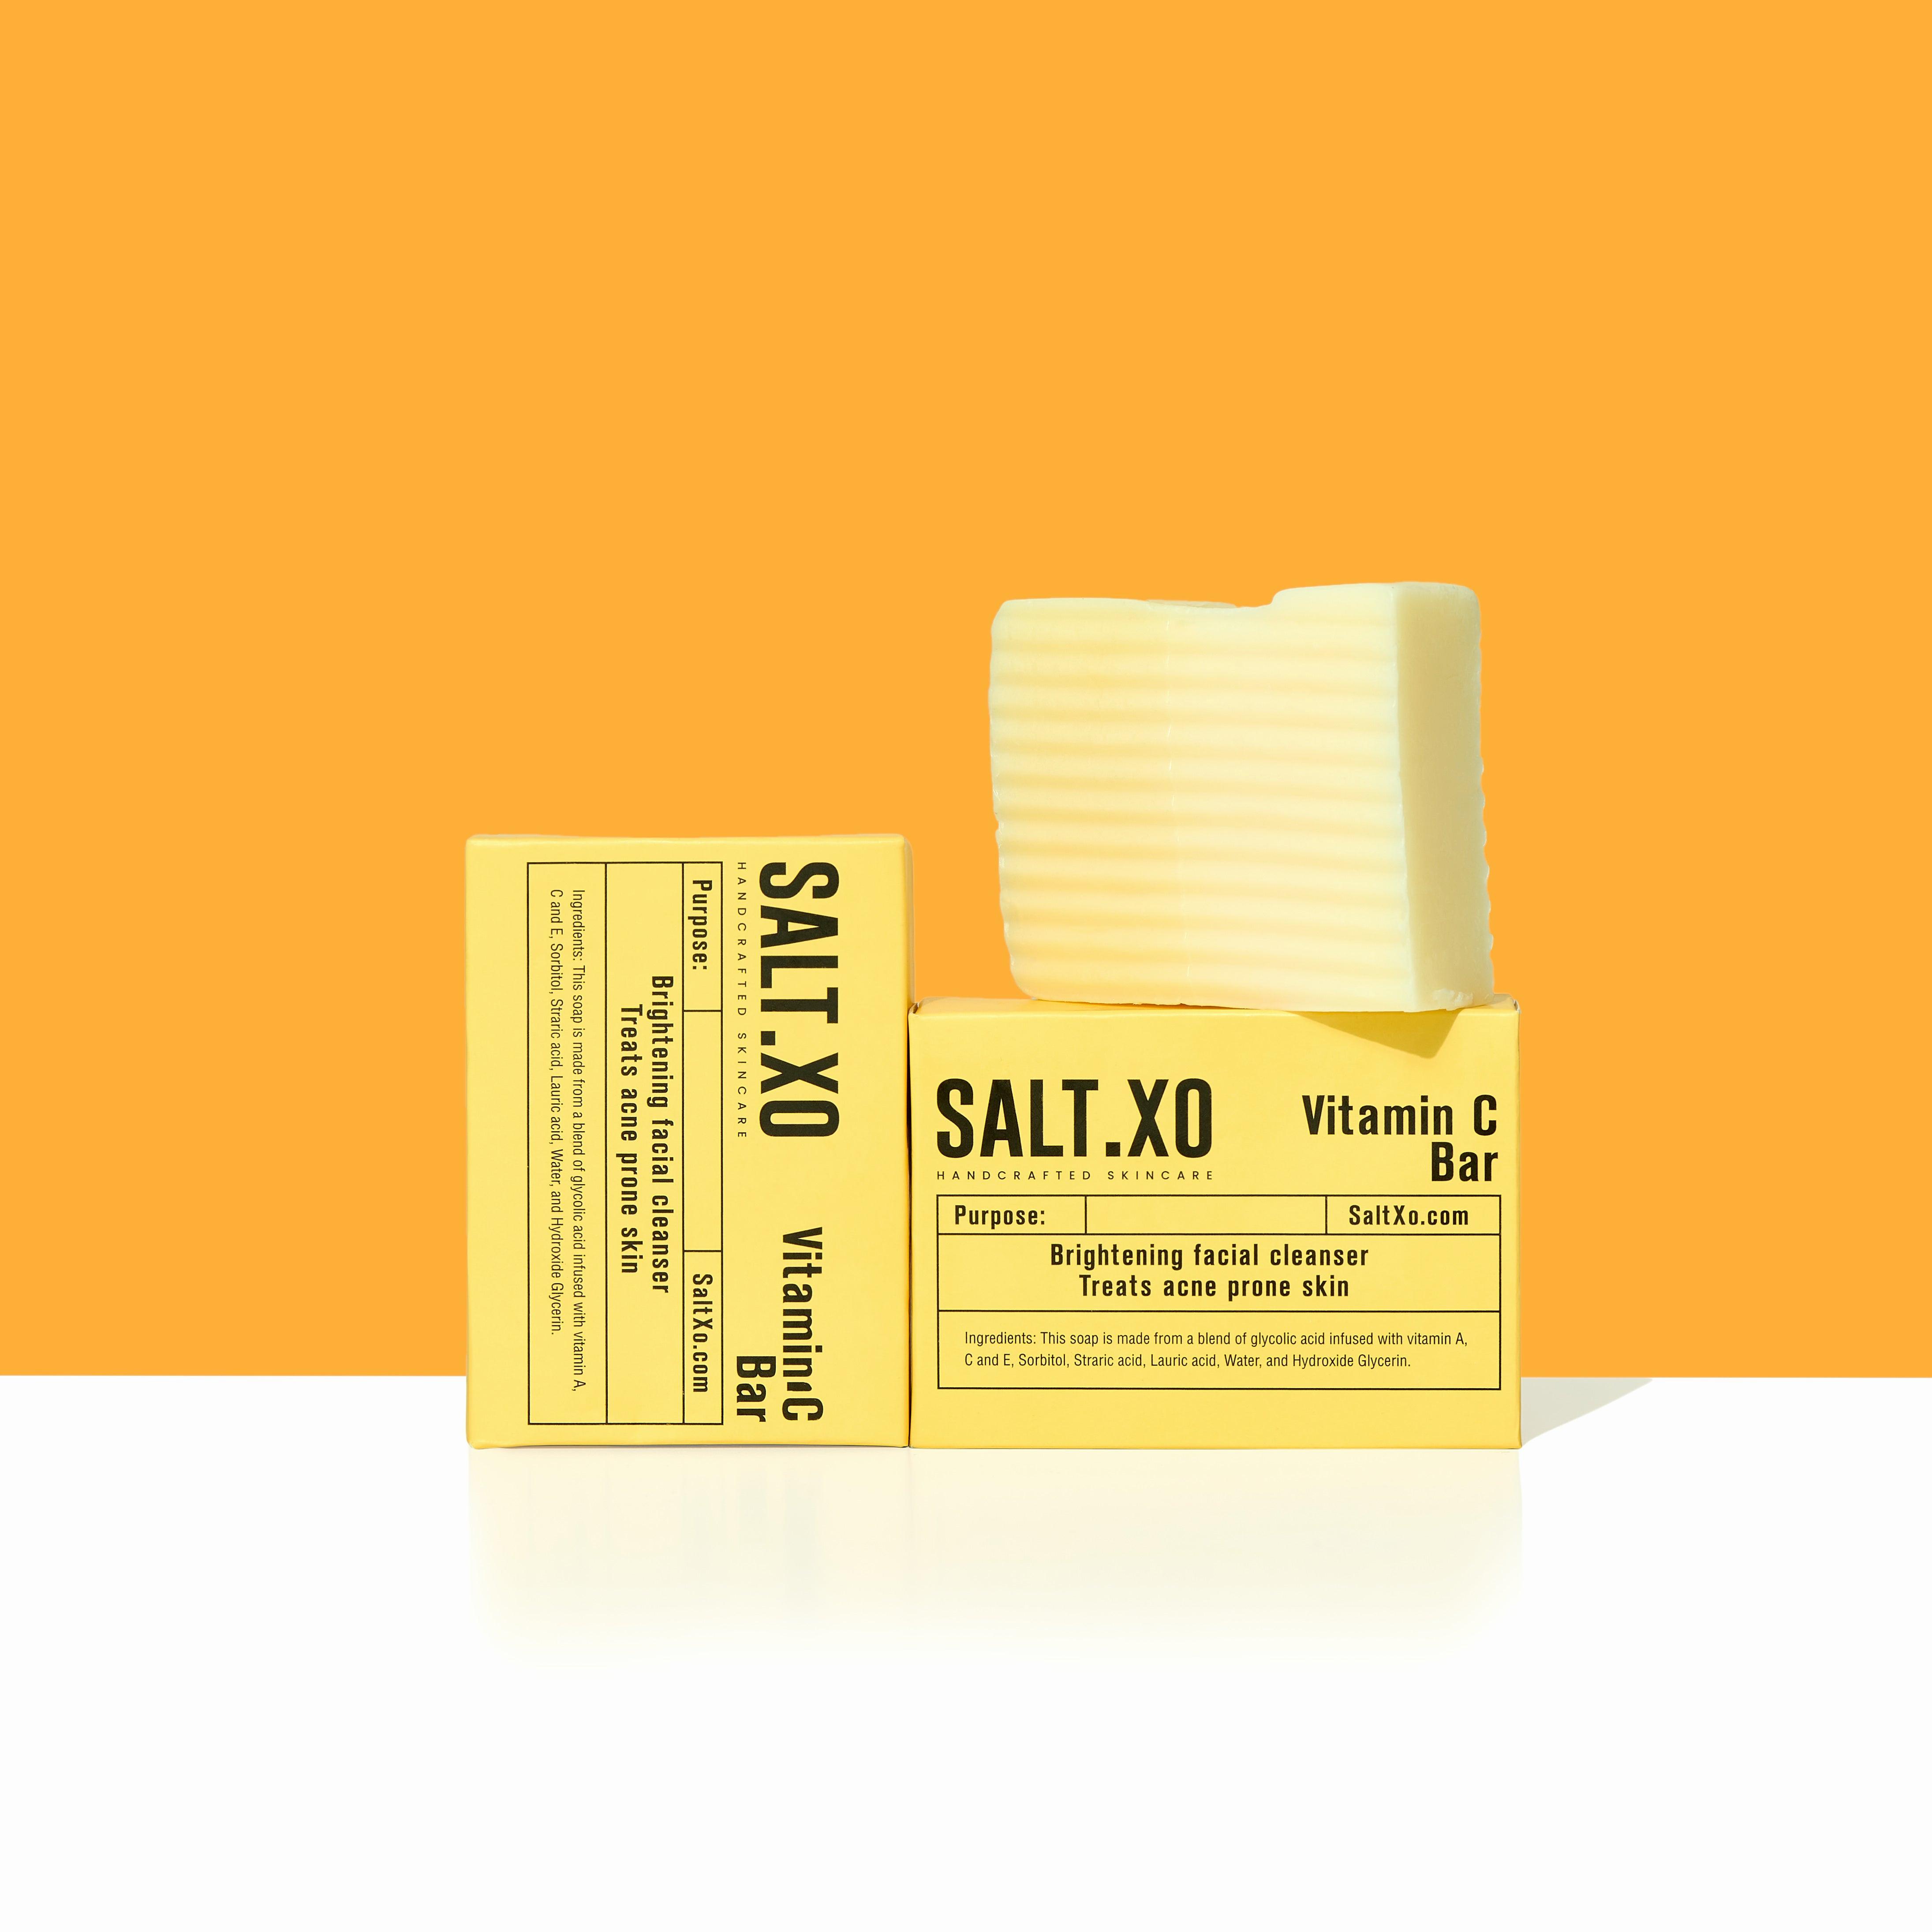 A yellow background displays two white and yellow rectangular boxes of handcrafted skincare products labeled as Vitamin C brightening facial cleanser bars.